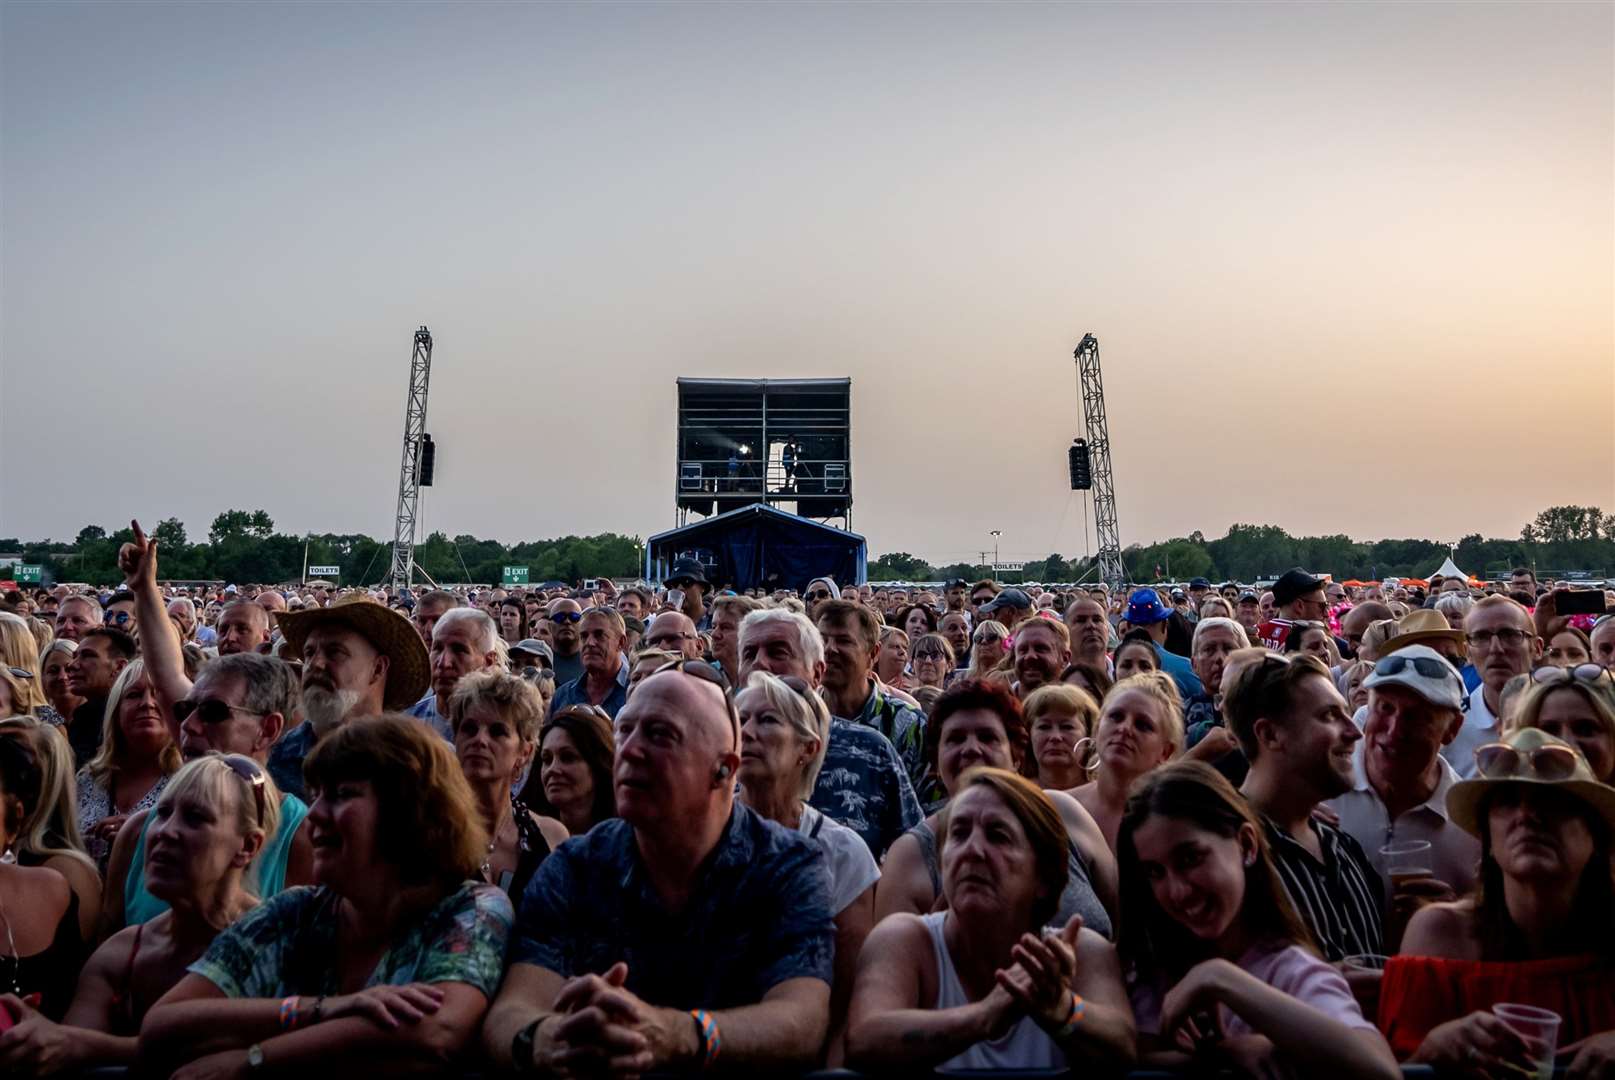 The Hop Farm (pictured), Kent Showground and Spitfire Ground have all hosted big summer concerts in the past. Picture: Haze Photography